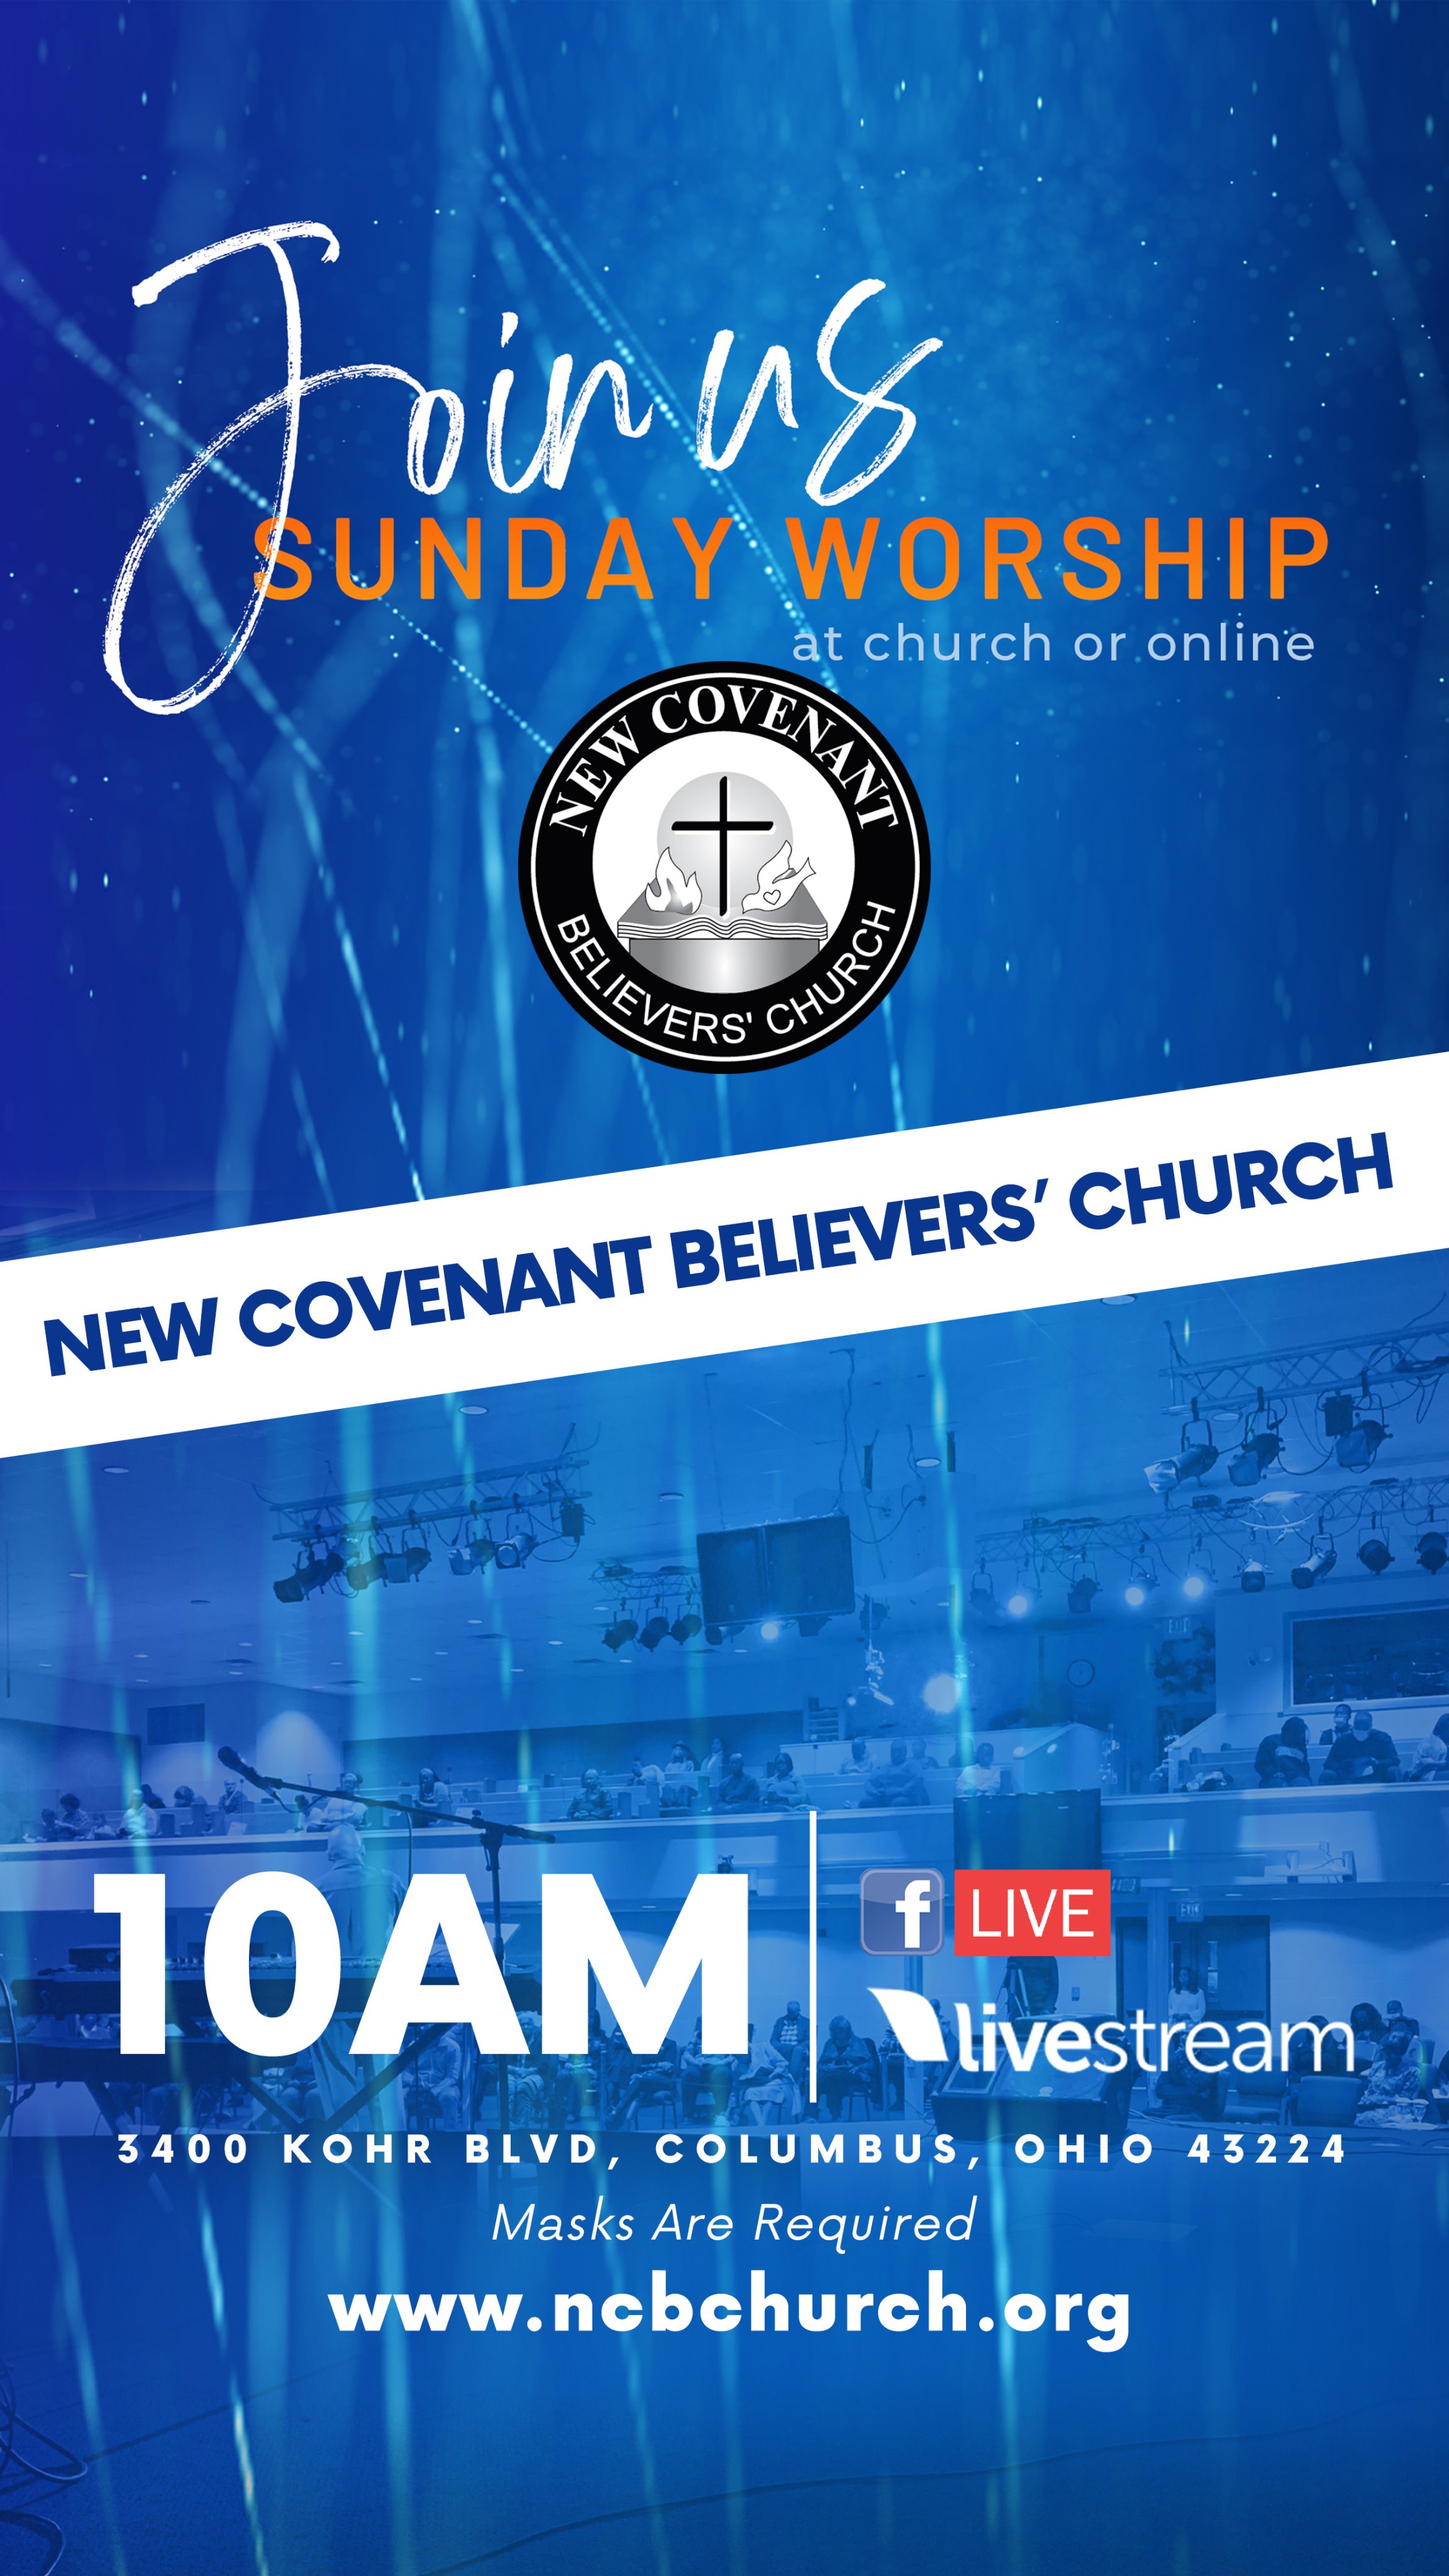 New Covenant Believers' Church (@Newcovenantbc) / Twitter